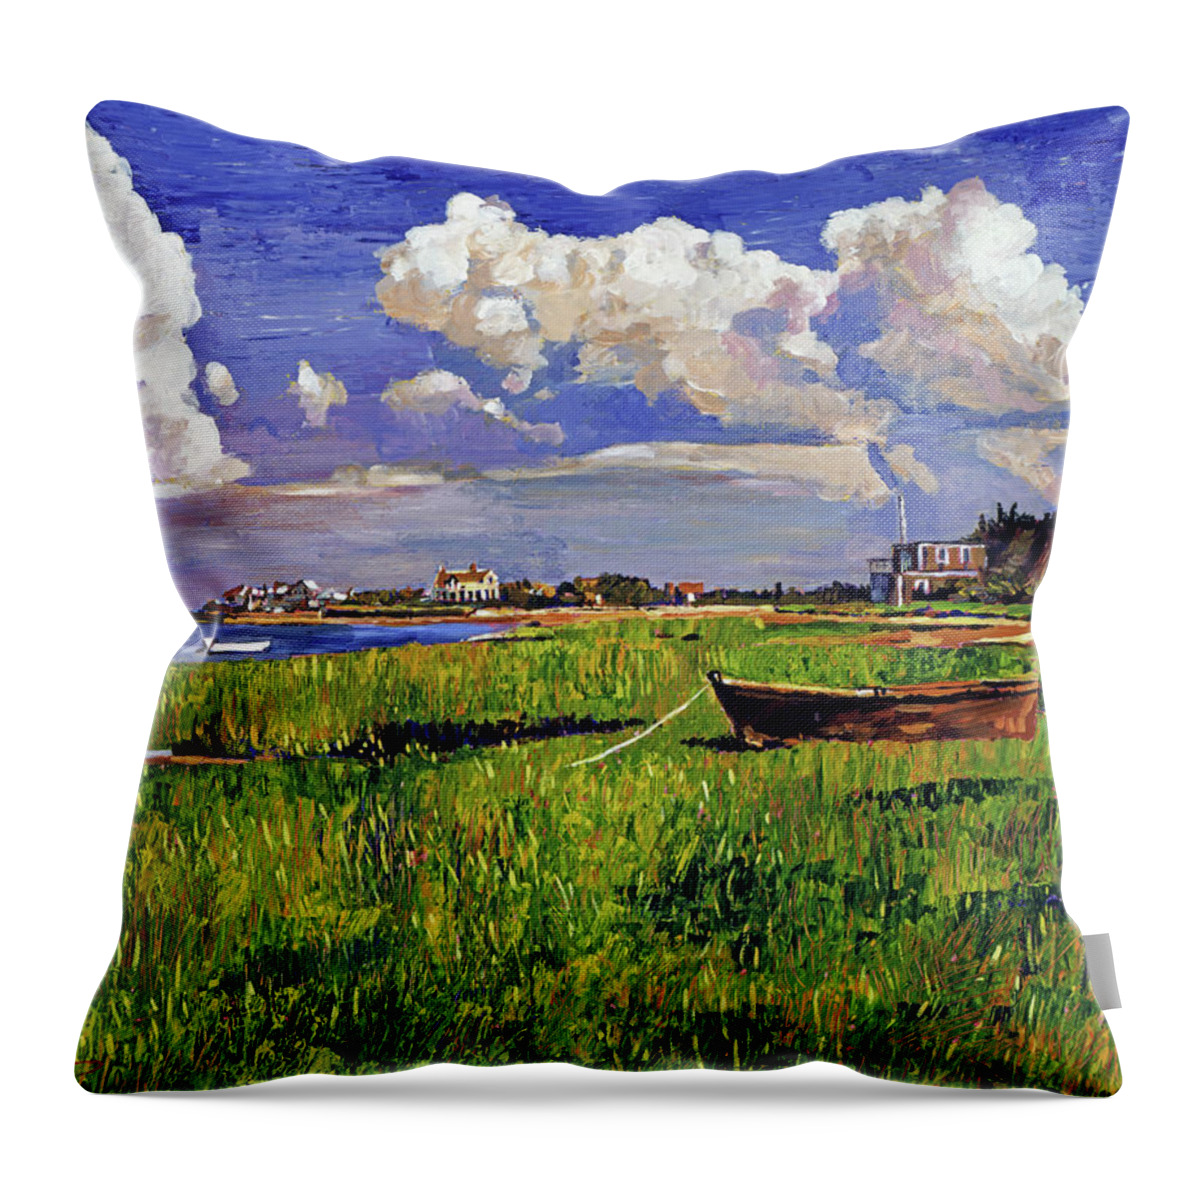 Landscape Throw Pillow featuring the painting A Cloudy Day At The Beach by David Lloyd Glover